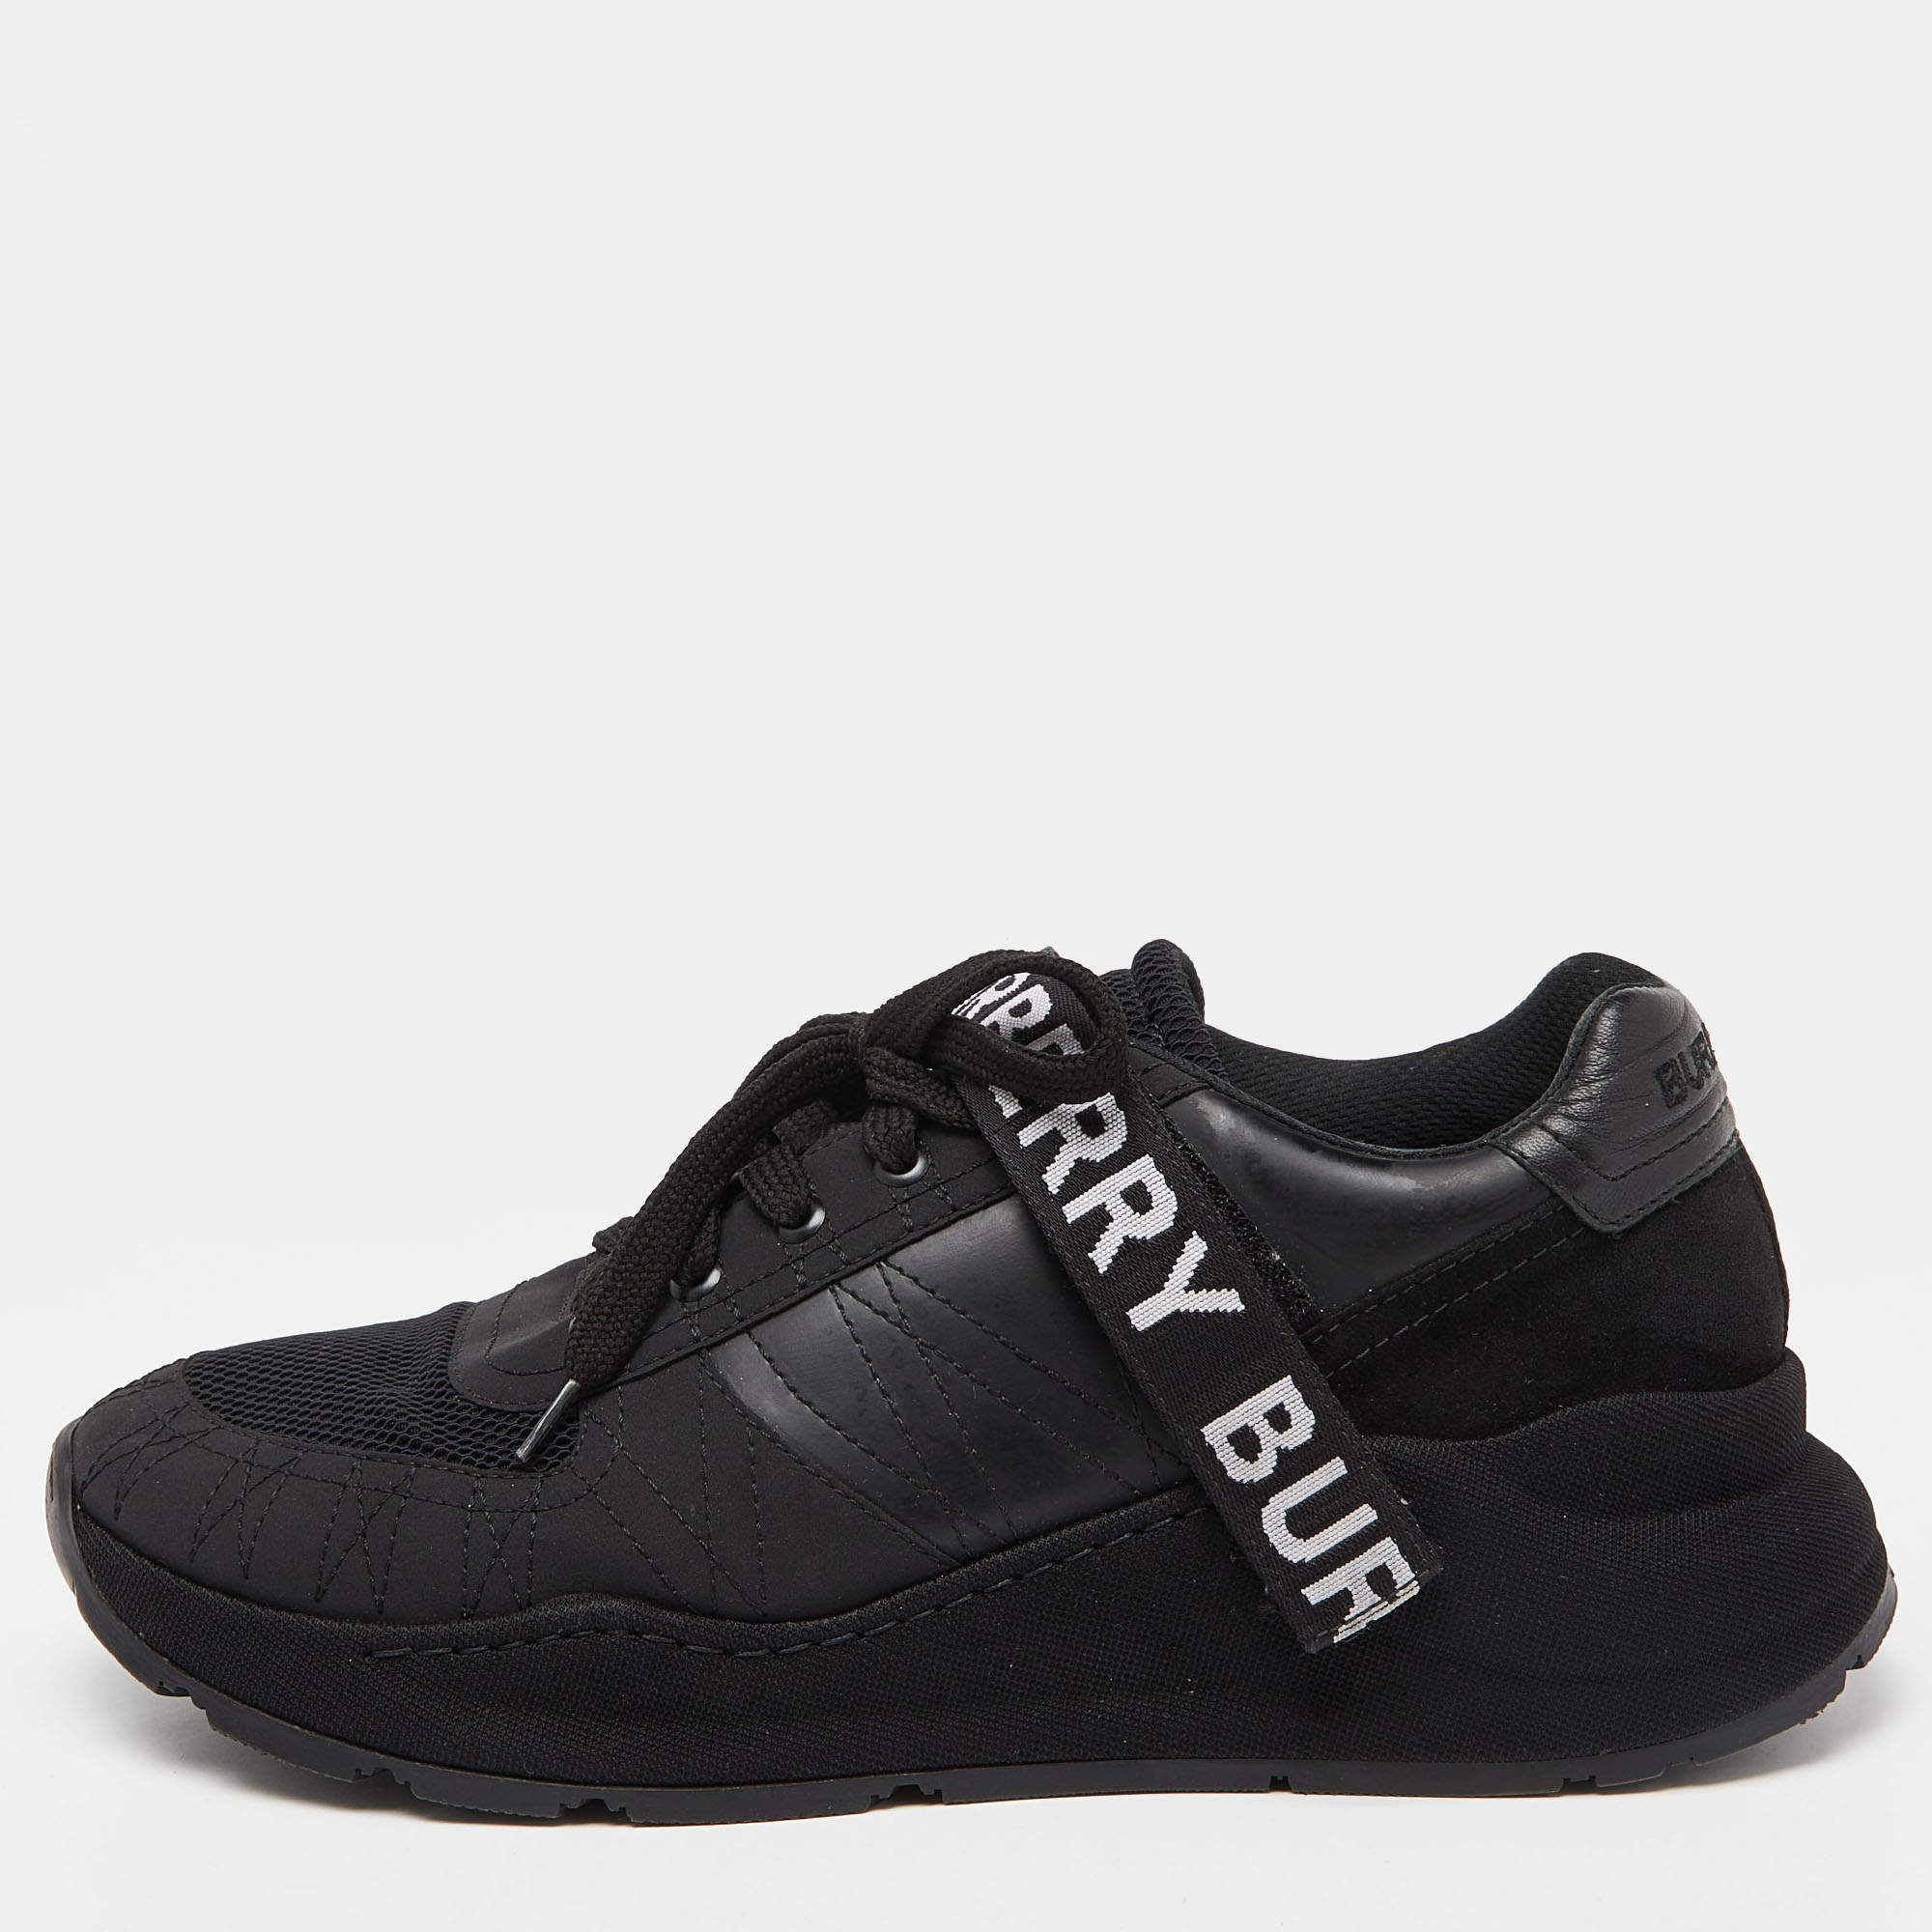 Burberry Black Mesh and Leather Logo Detail Low Top Sneakers Size 43